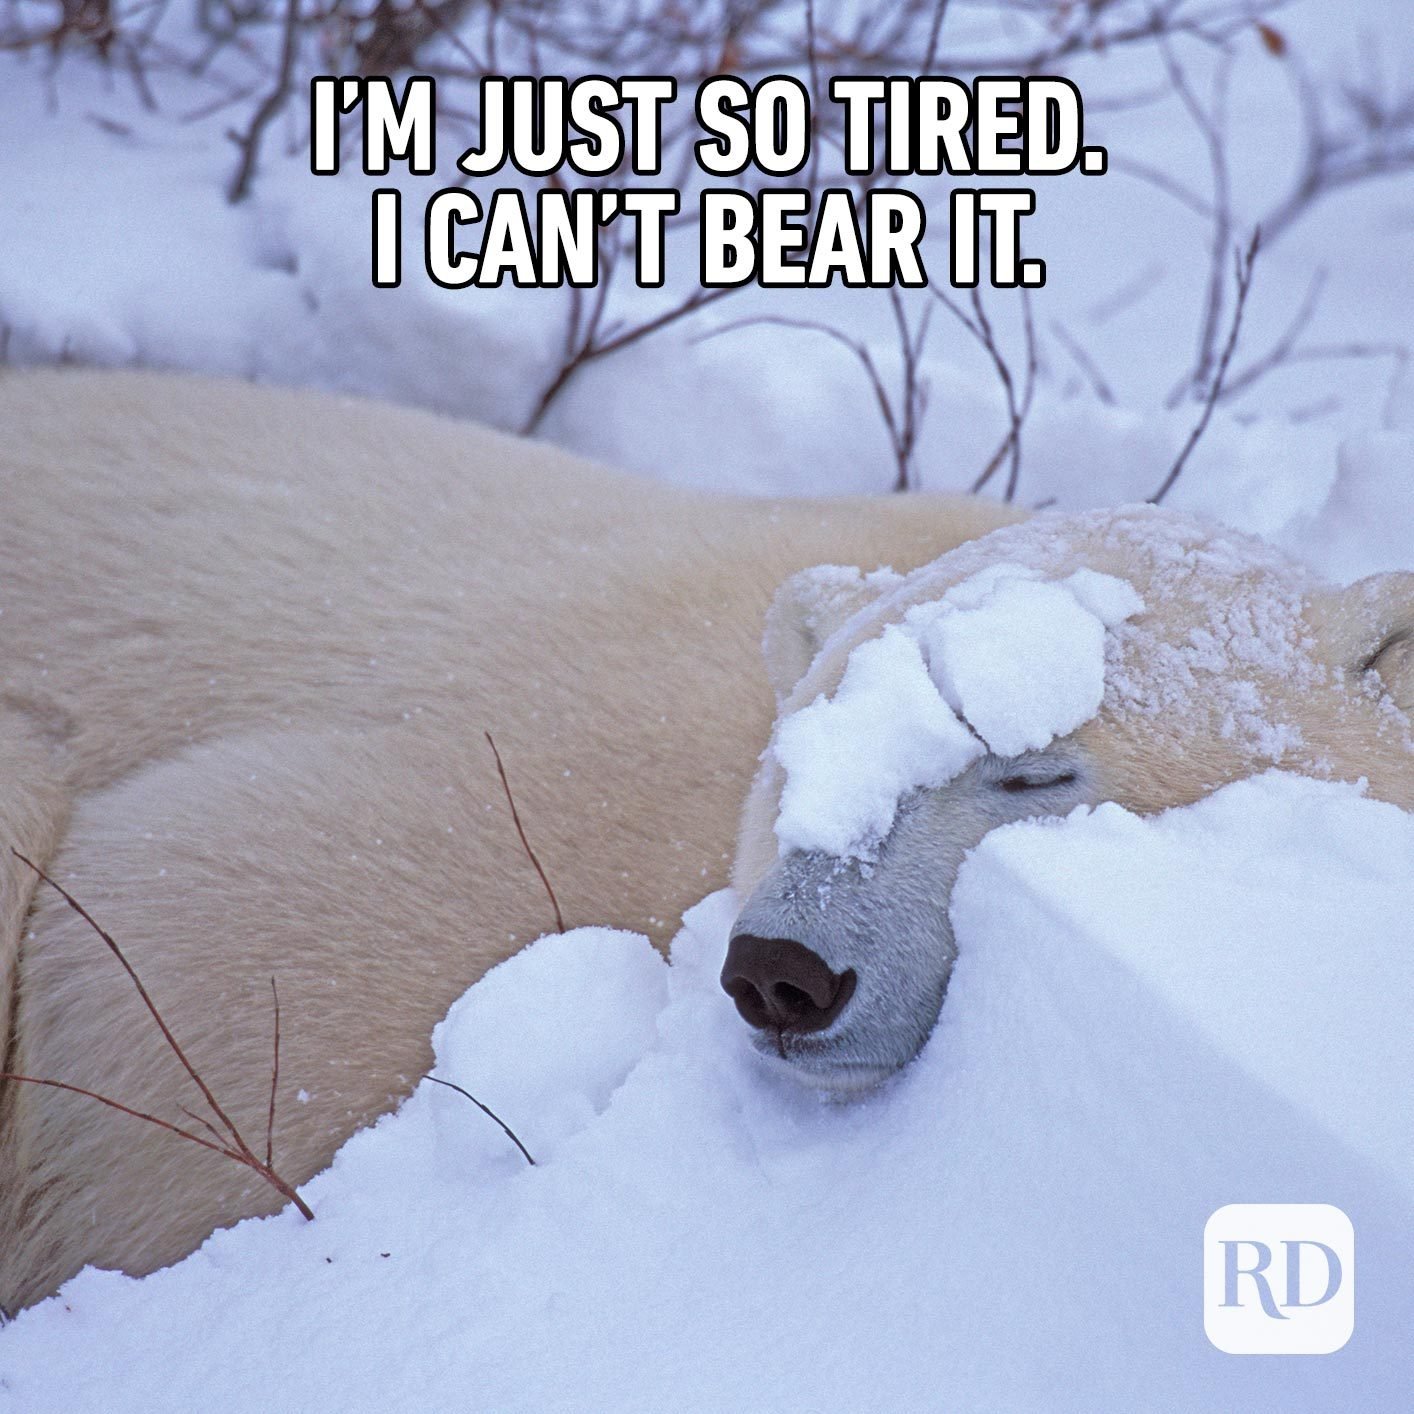 Polar bear in snow. Meme text: I'm just so tired. I can't bear it.